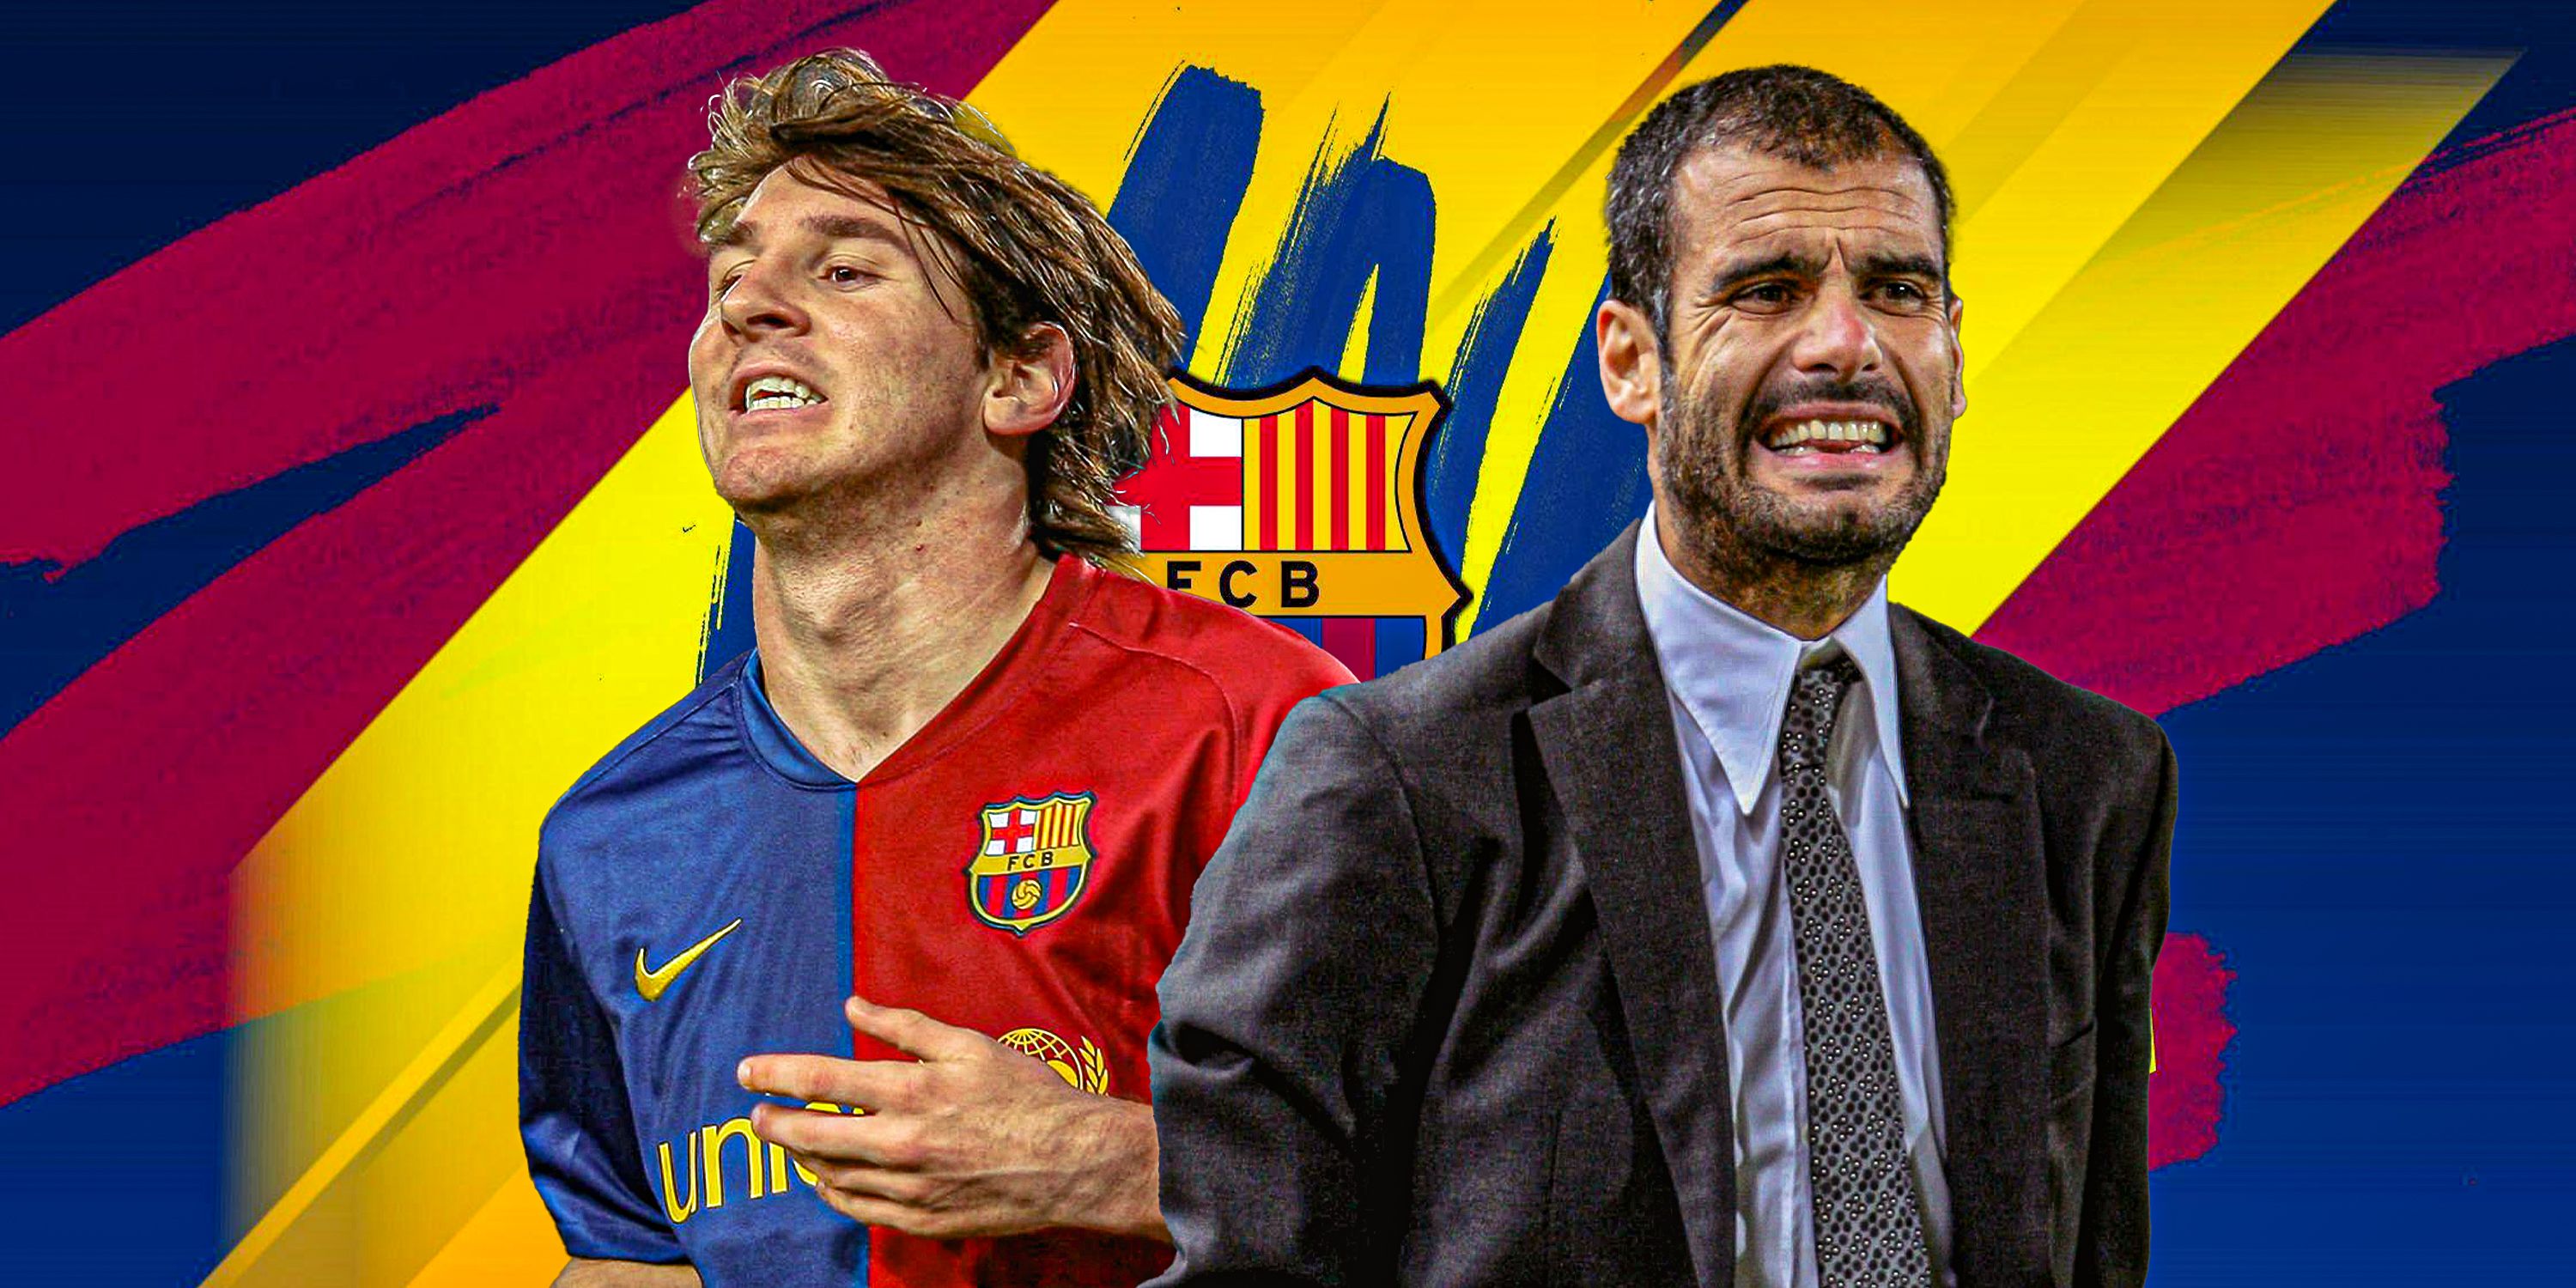 Lionel Messi (in Barcelona kit) and Pep Guardiola - both pictures from around 2008 with Barcelona theme